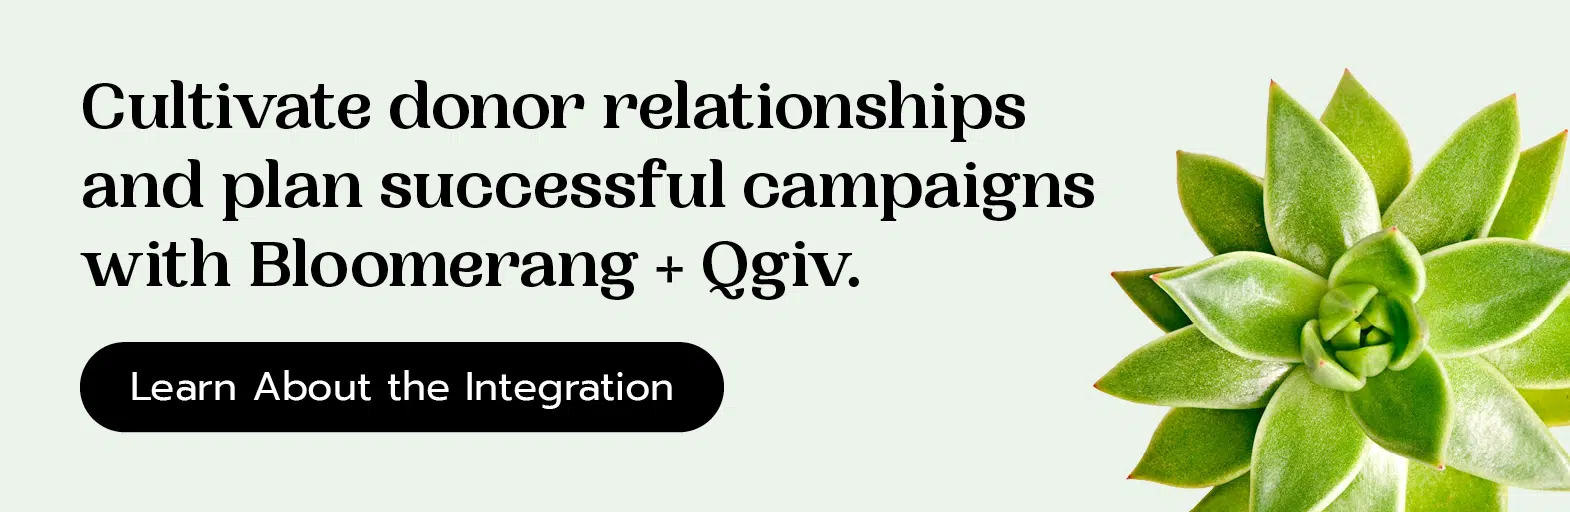 Cultivate donor relationships and plan successful campaigns with Bloomerang + Qgiv. Learn about the integration here. 